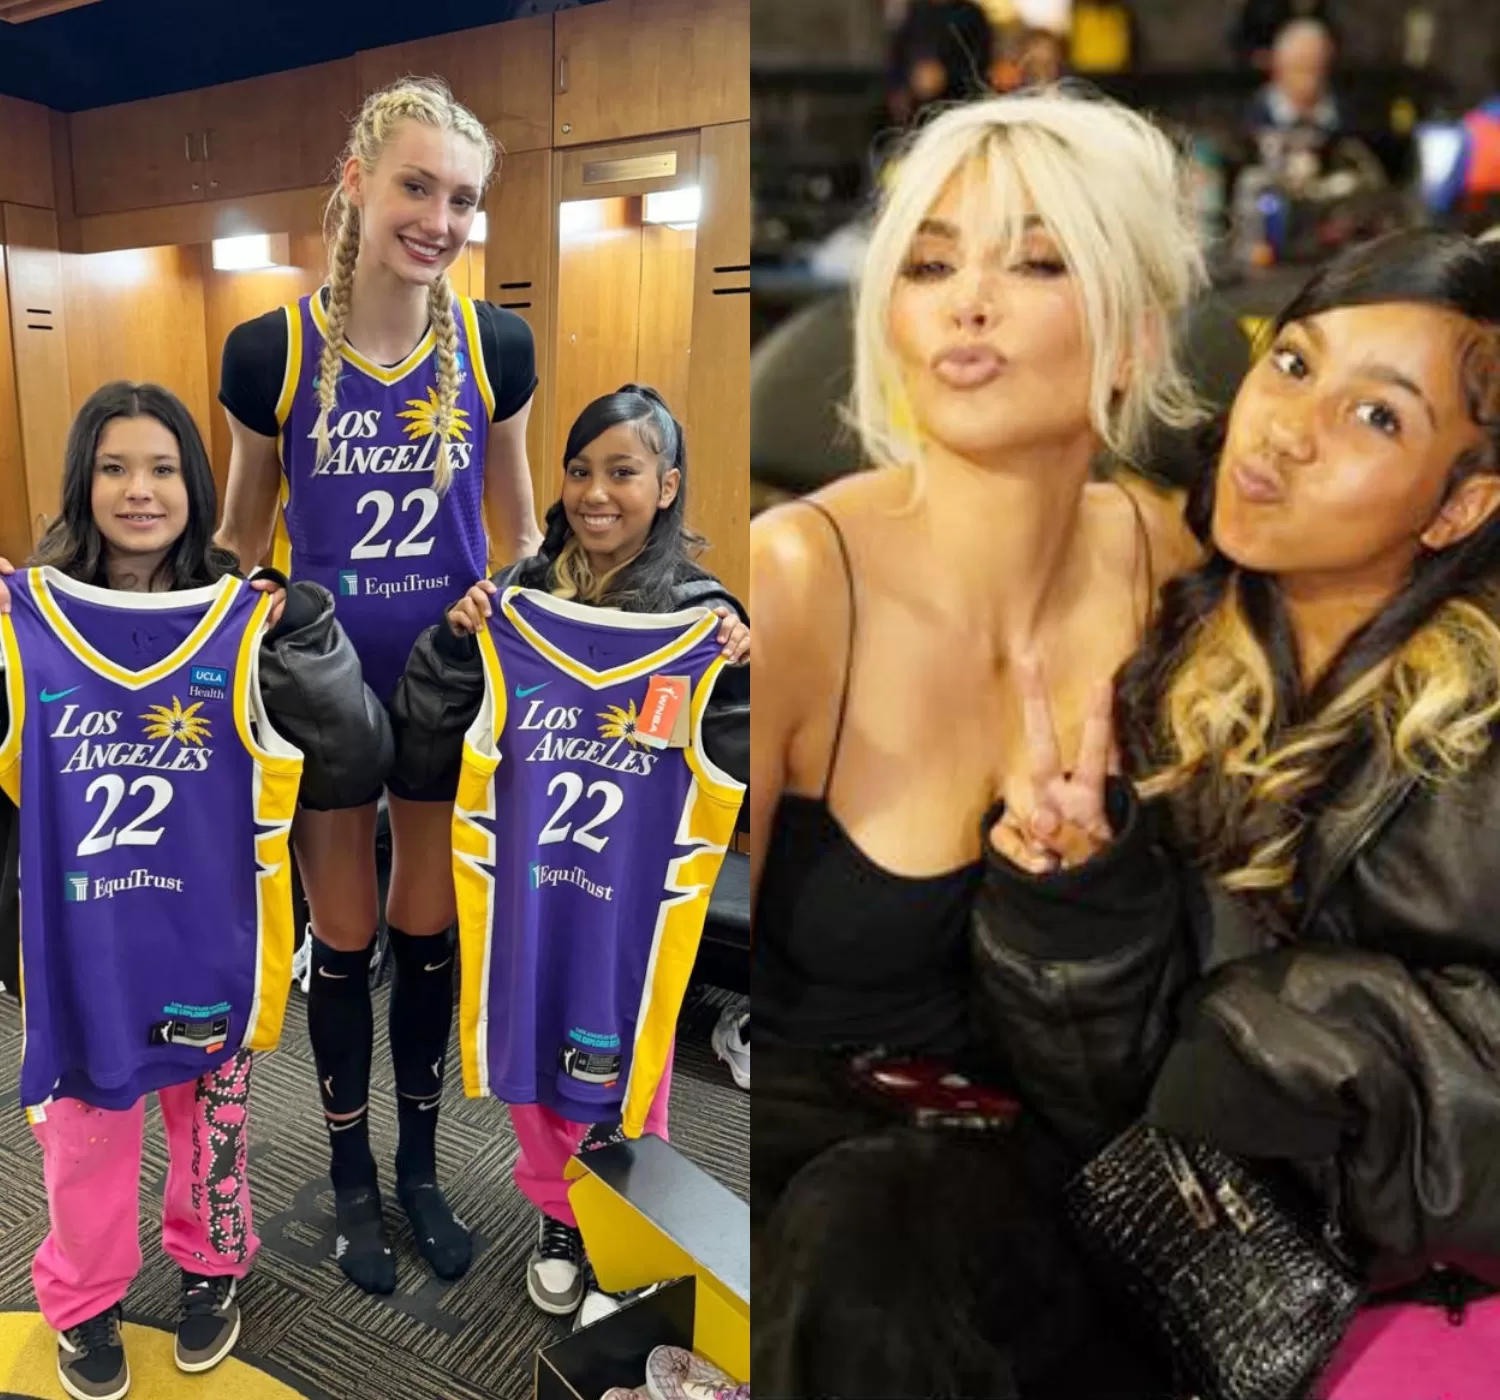 Cover Image for Carefree Kim Kardashian enjoys ‘fun night’ with daughter North at basketball game after brutal Tom Brady roast